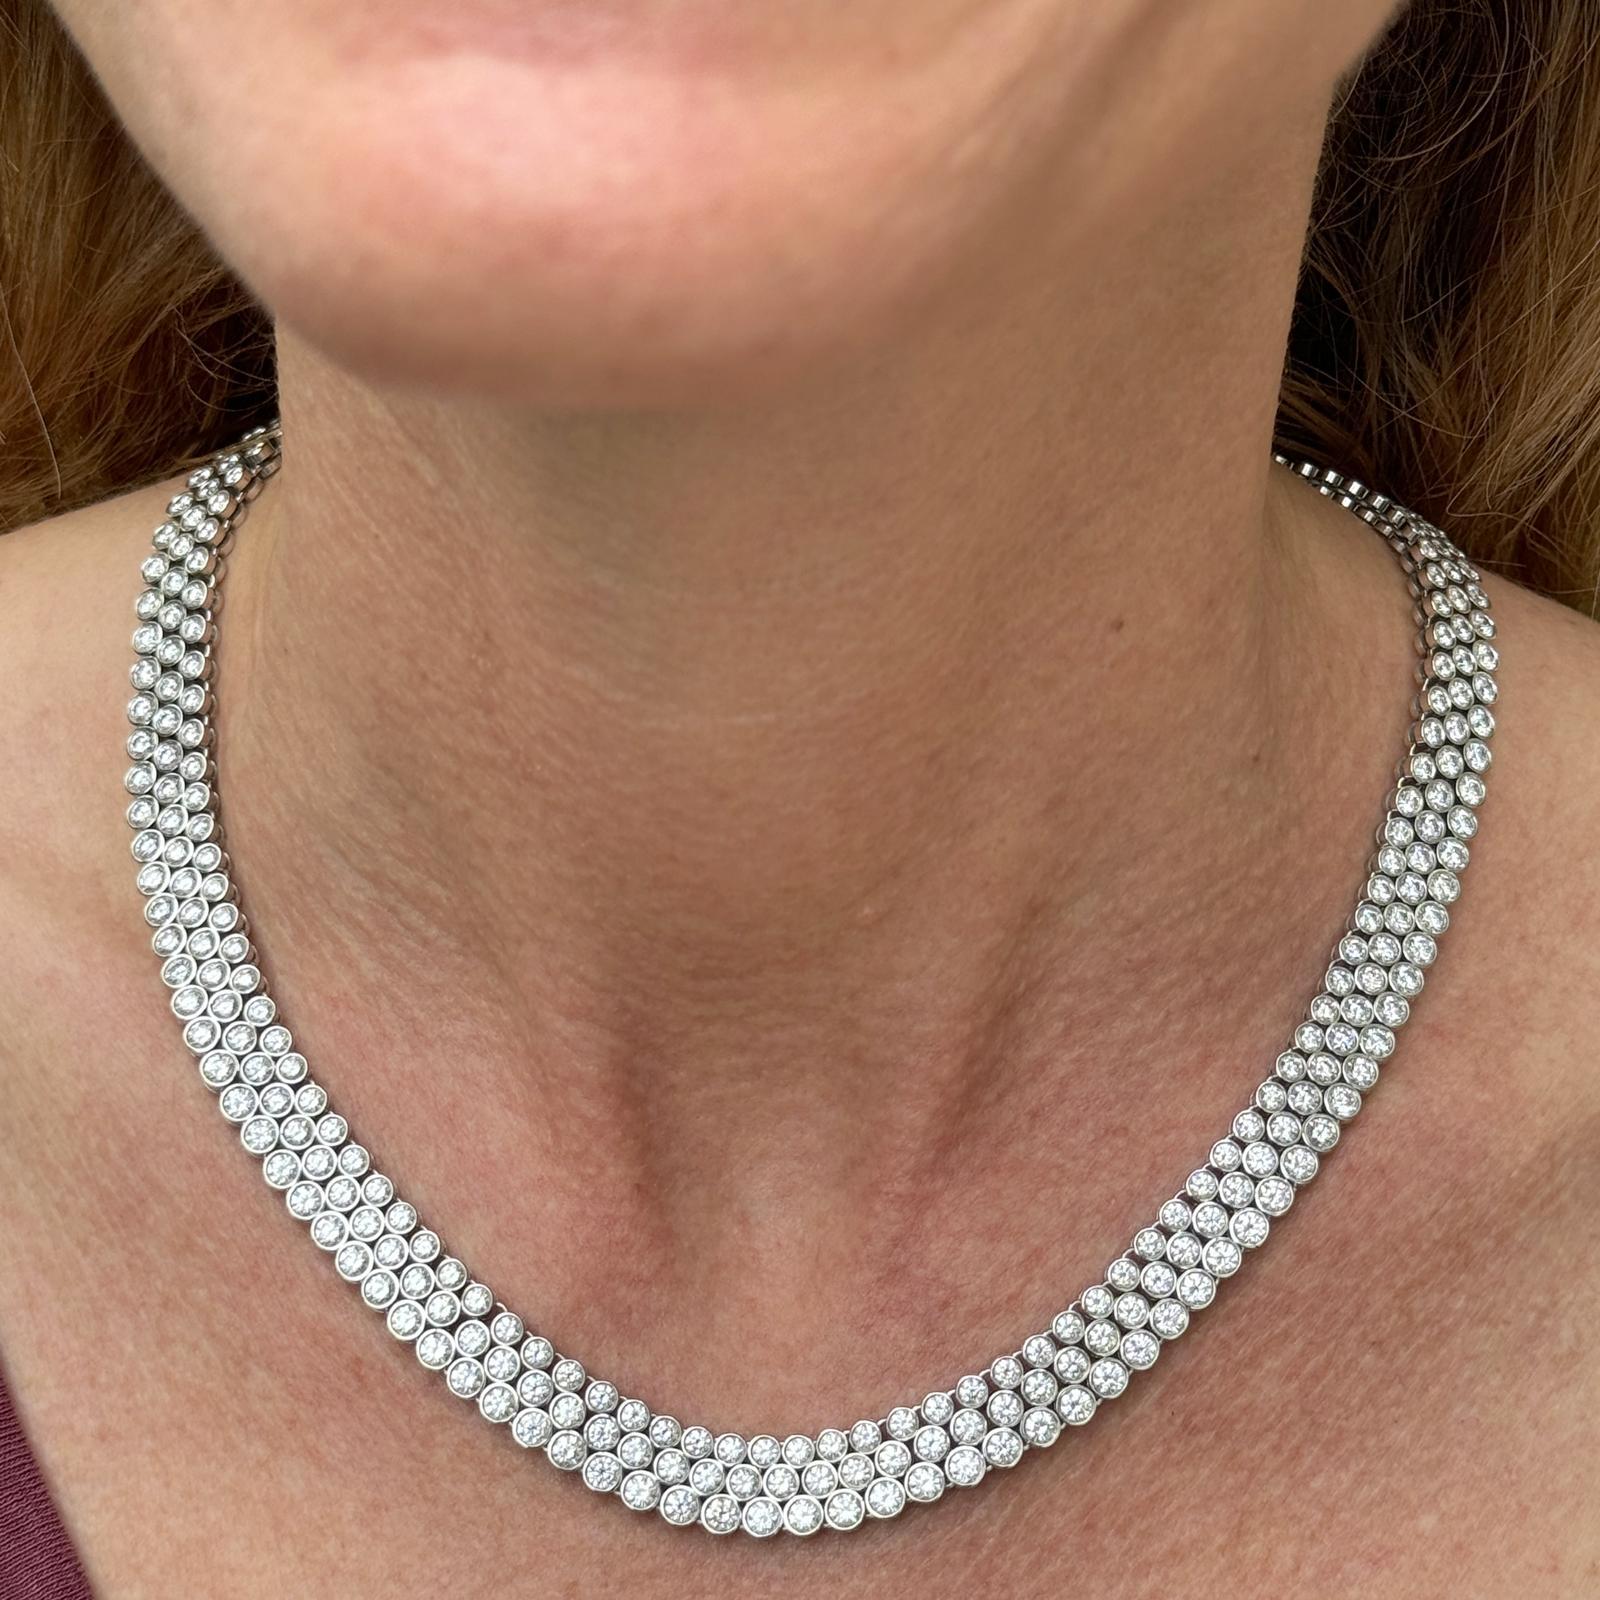 Stunning Three Row Diamond Necklace handcrafted in 18 karat white gold. The bezel set diamond necklace features 333 round brilliant cut diamonds weighing approximately 32 carat total weight. The high quality diamonds are graded F-G color and VS2-SI1